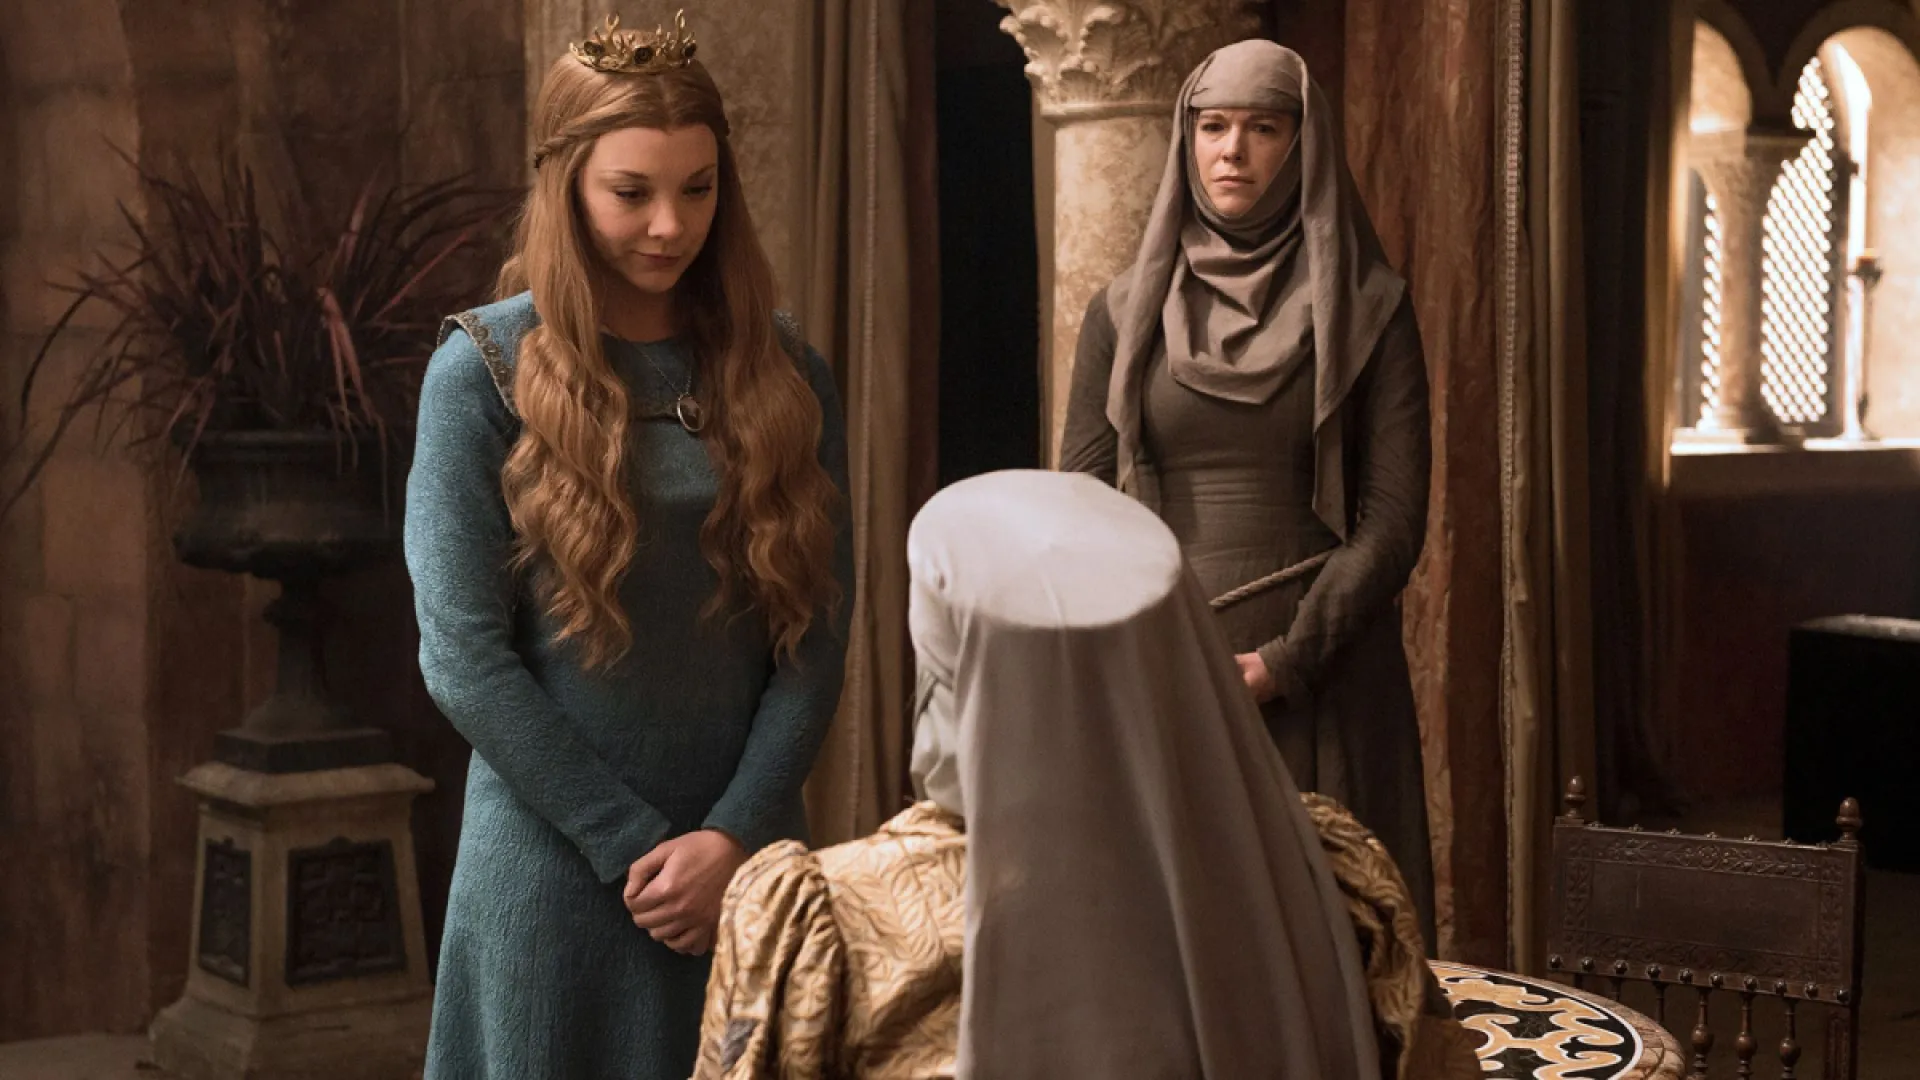 Margaery Tyrell (Natalie Dormer) and Septa Unella (Hannah Waddingham) in 'Game of Thrones'